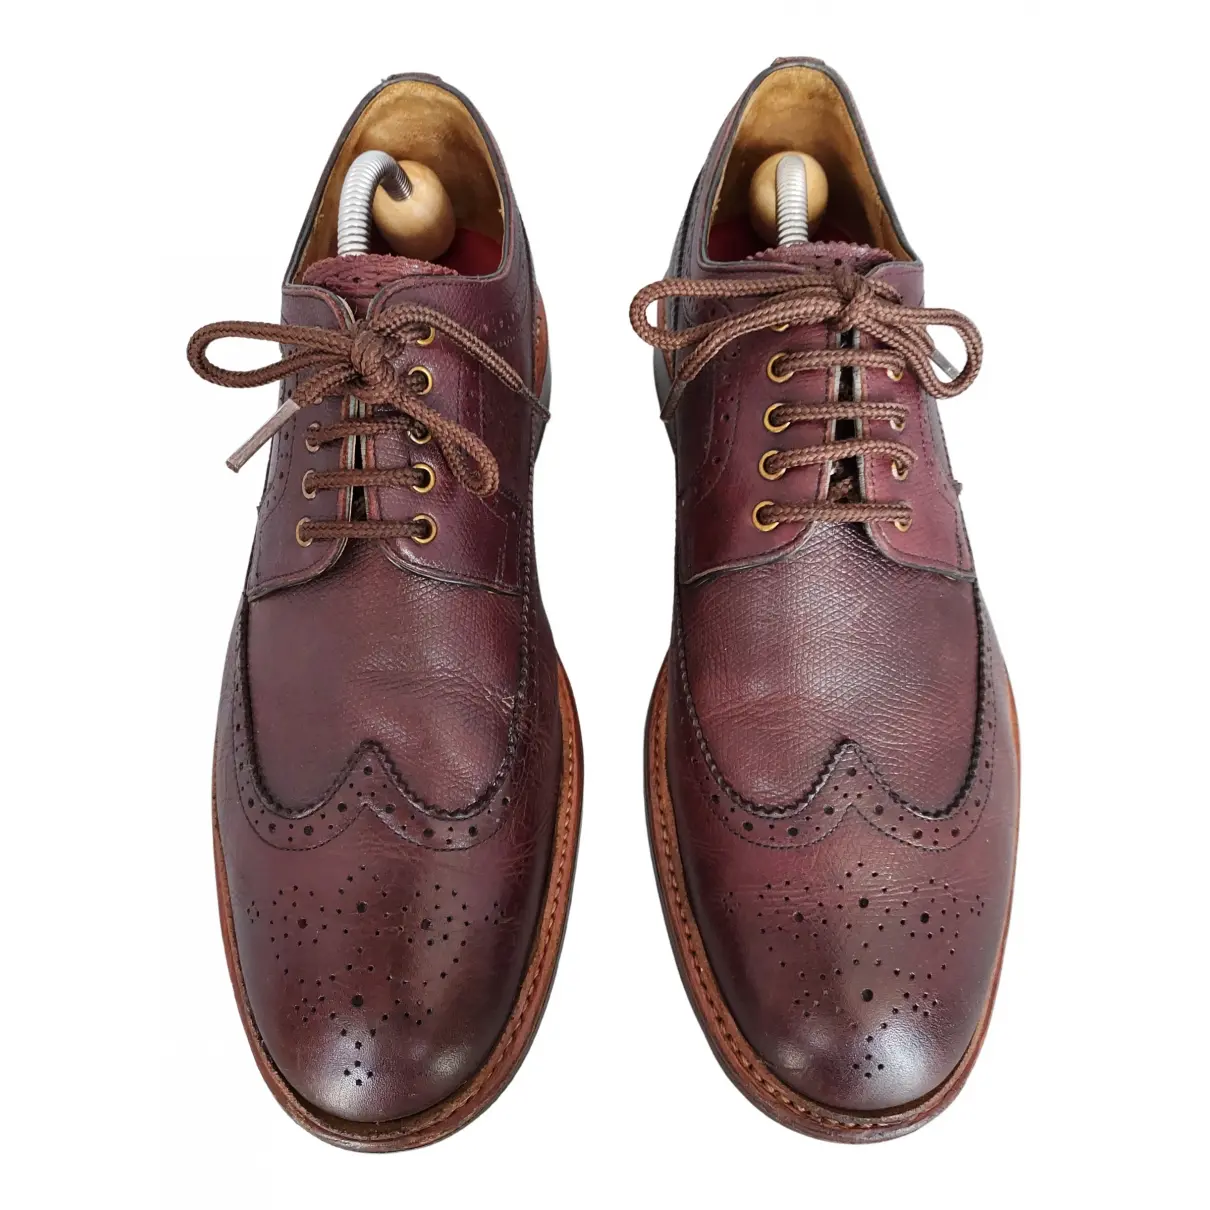 Leather lace ups Grenson